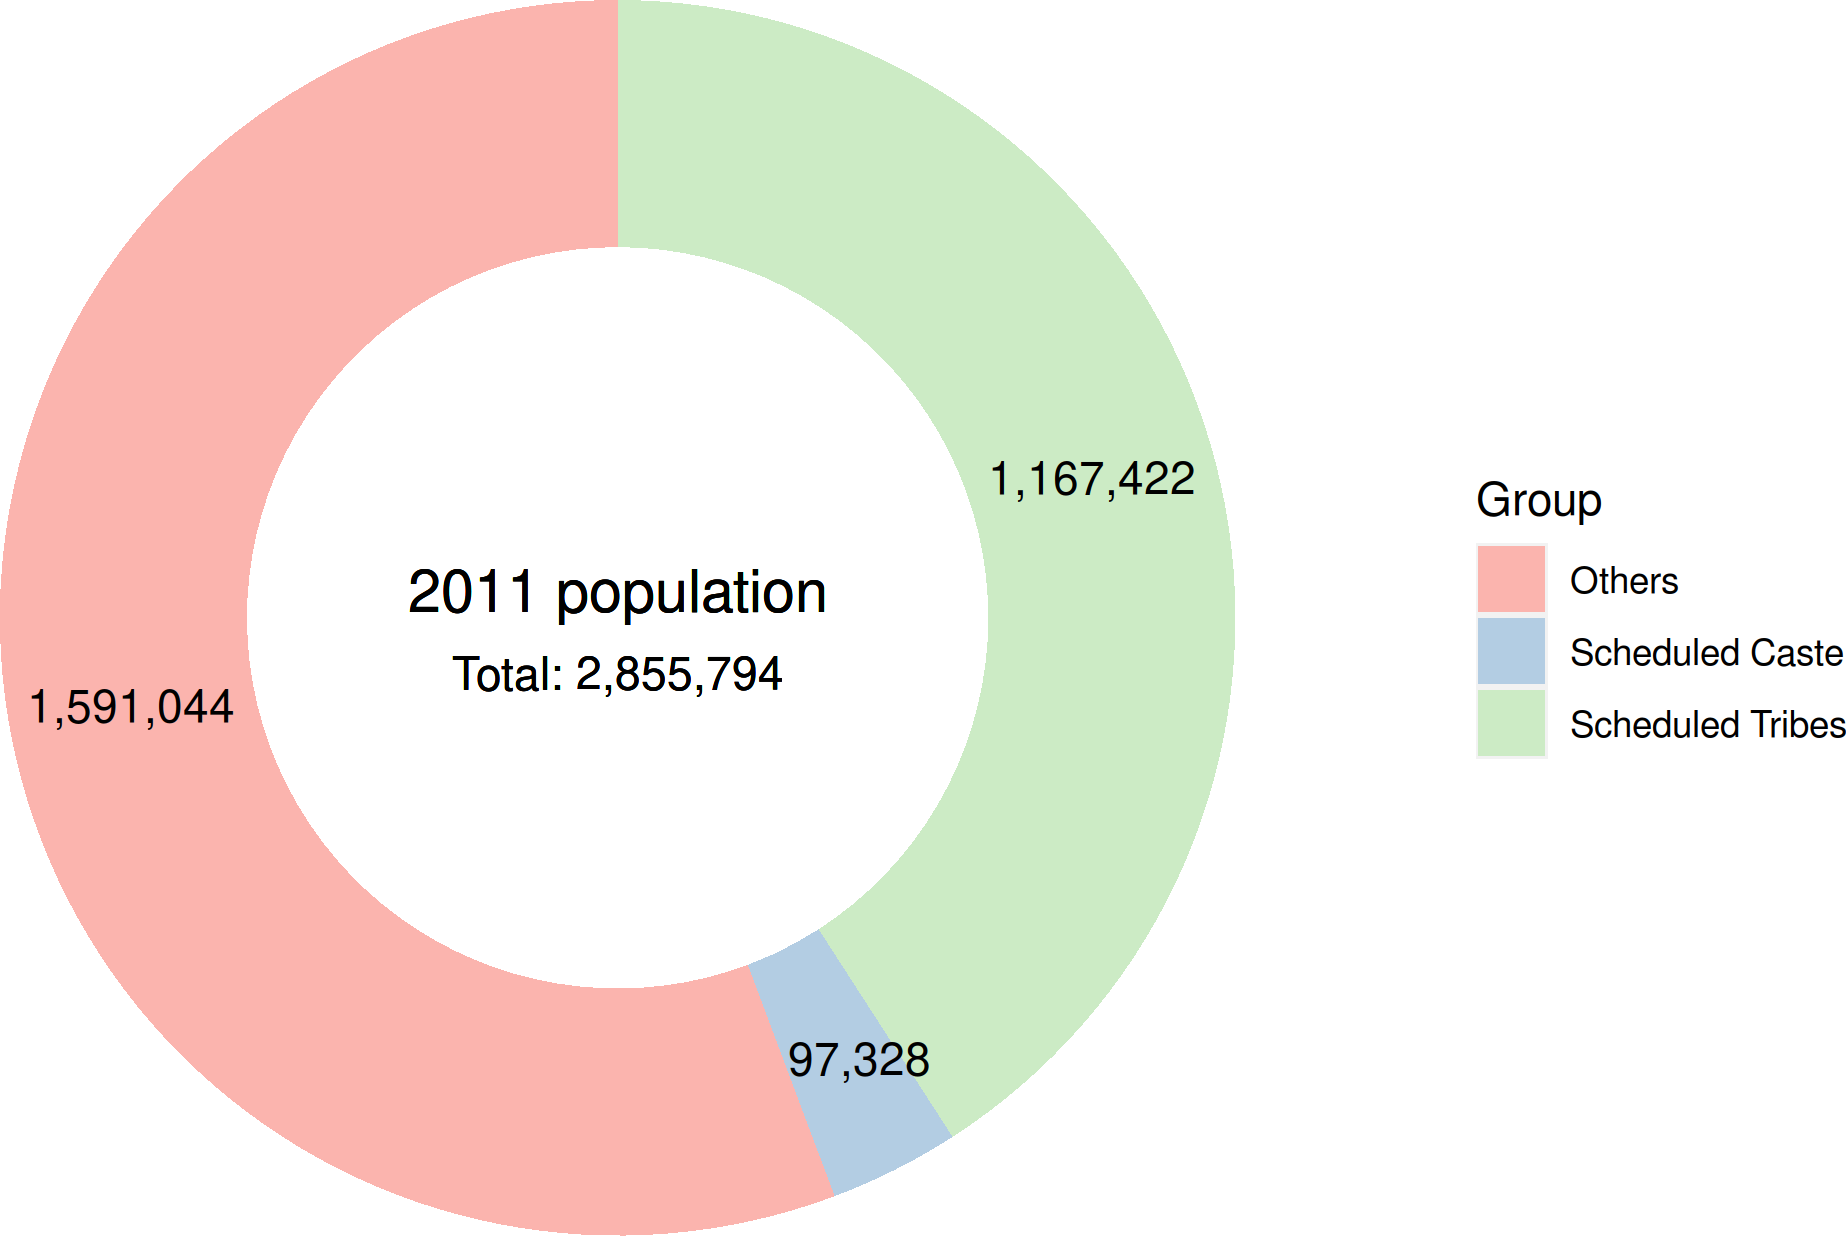 Population of SC, ST and Other ethnic groups